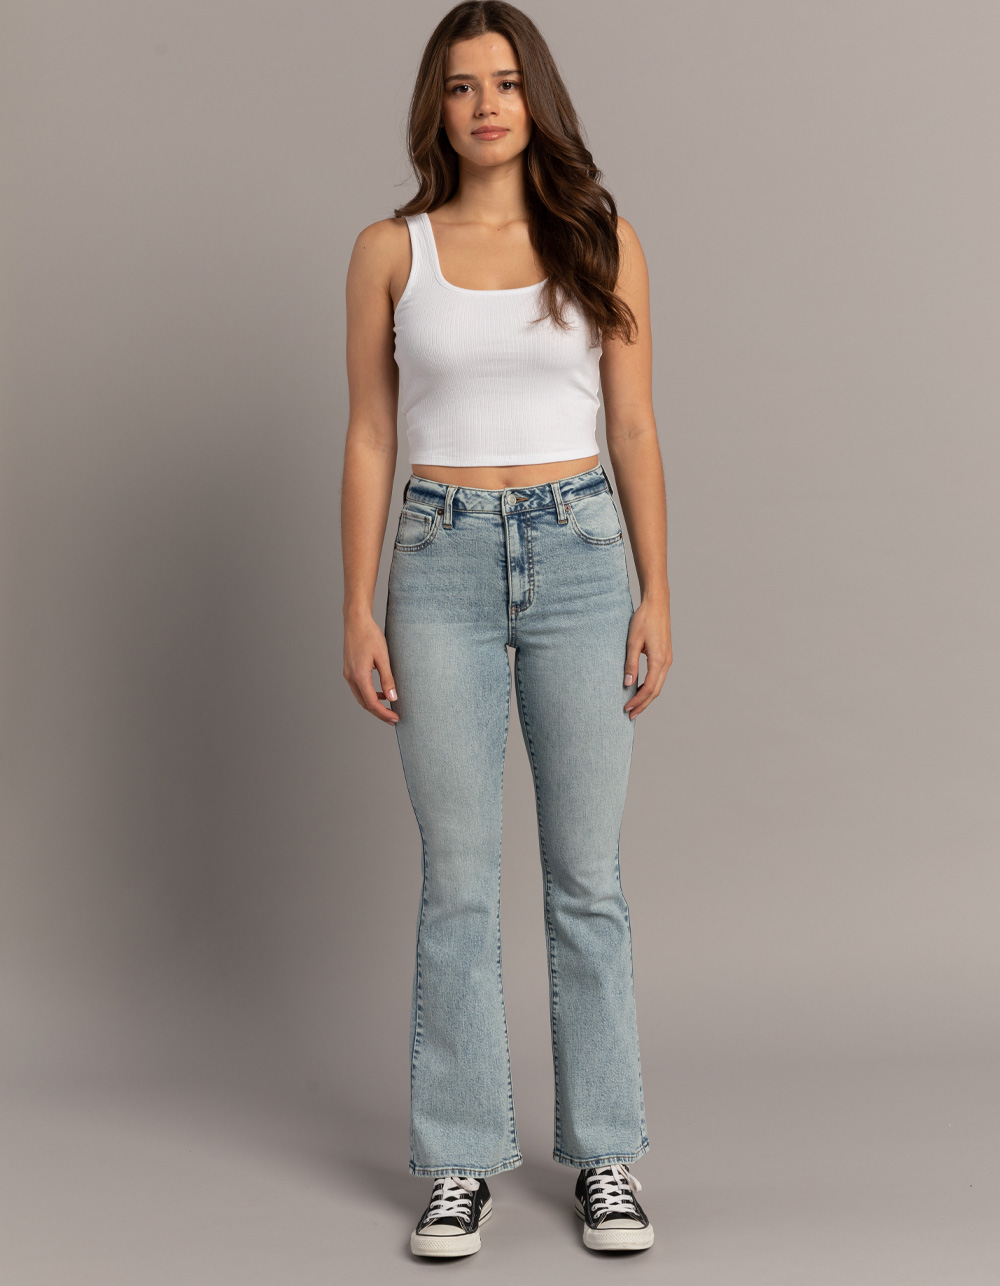 BDG Urban Outfitters Tiana Low Rise Flare Womens Denim Jeans